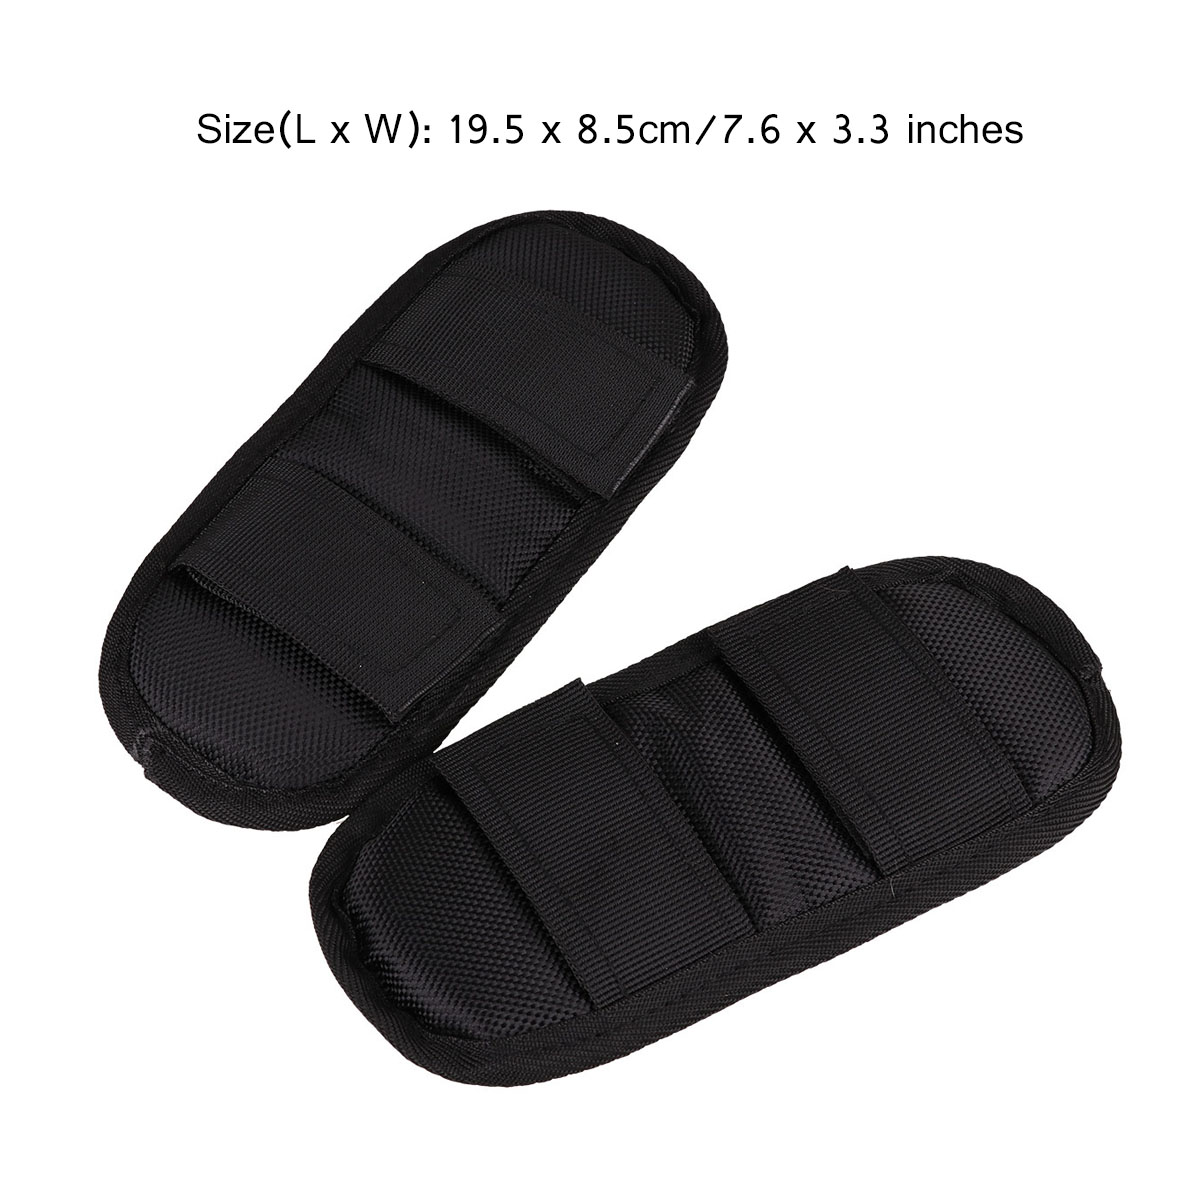 2 Durable Oxford Fabric Shoulder Pads Non Slip Anti Shock Strap Cushions Hook and Loop Fastener Shoulder Mats for Bags Backpacks